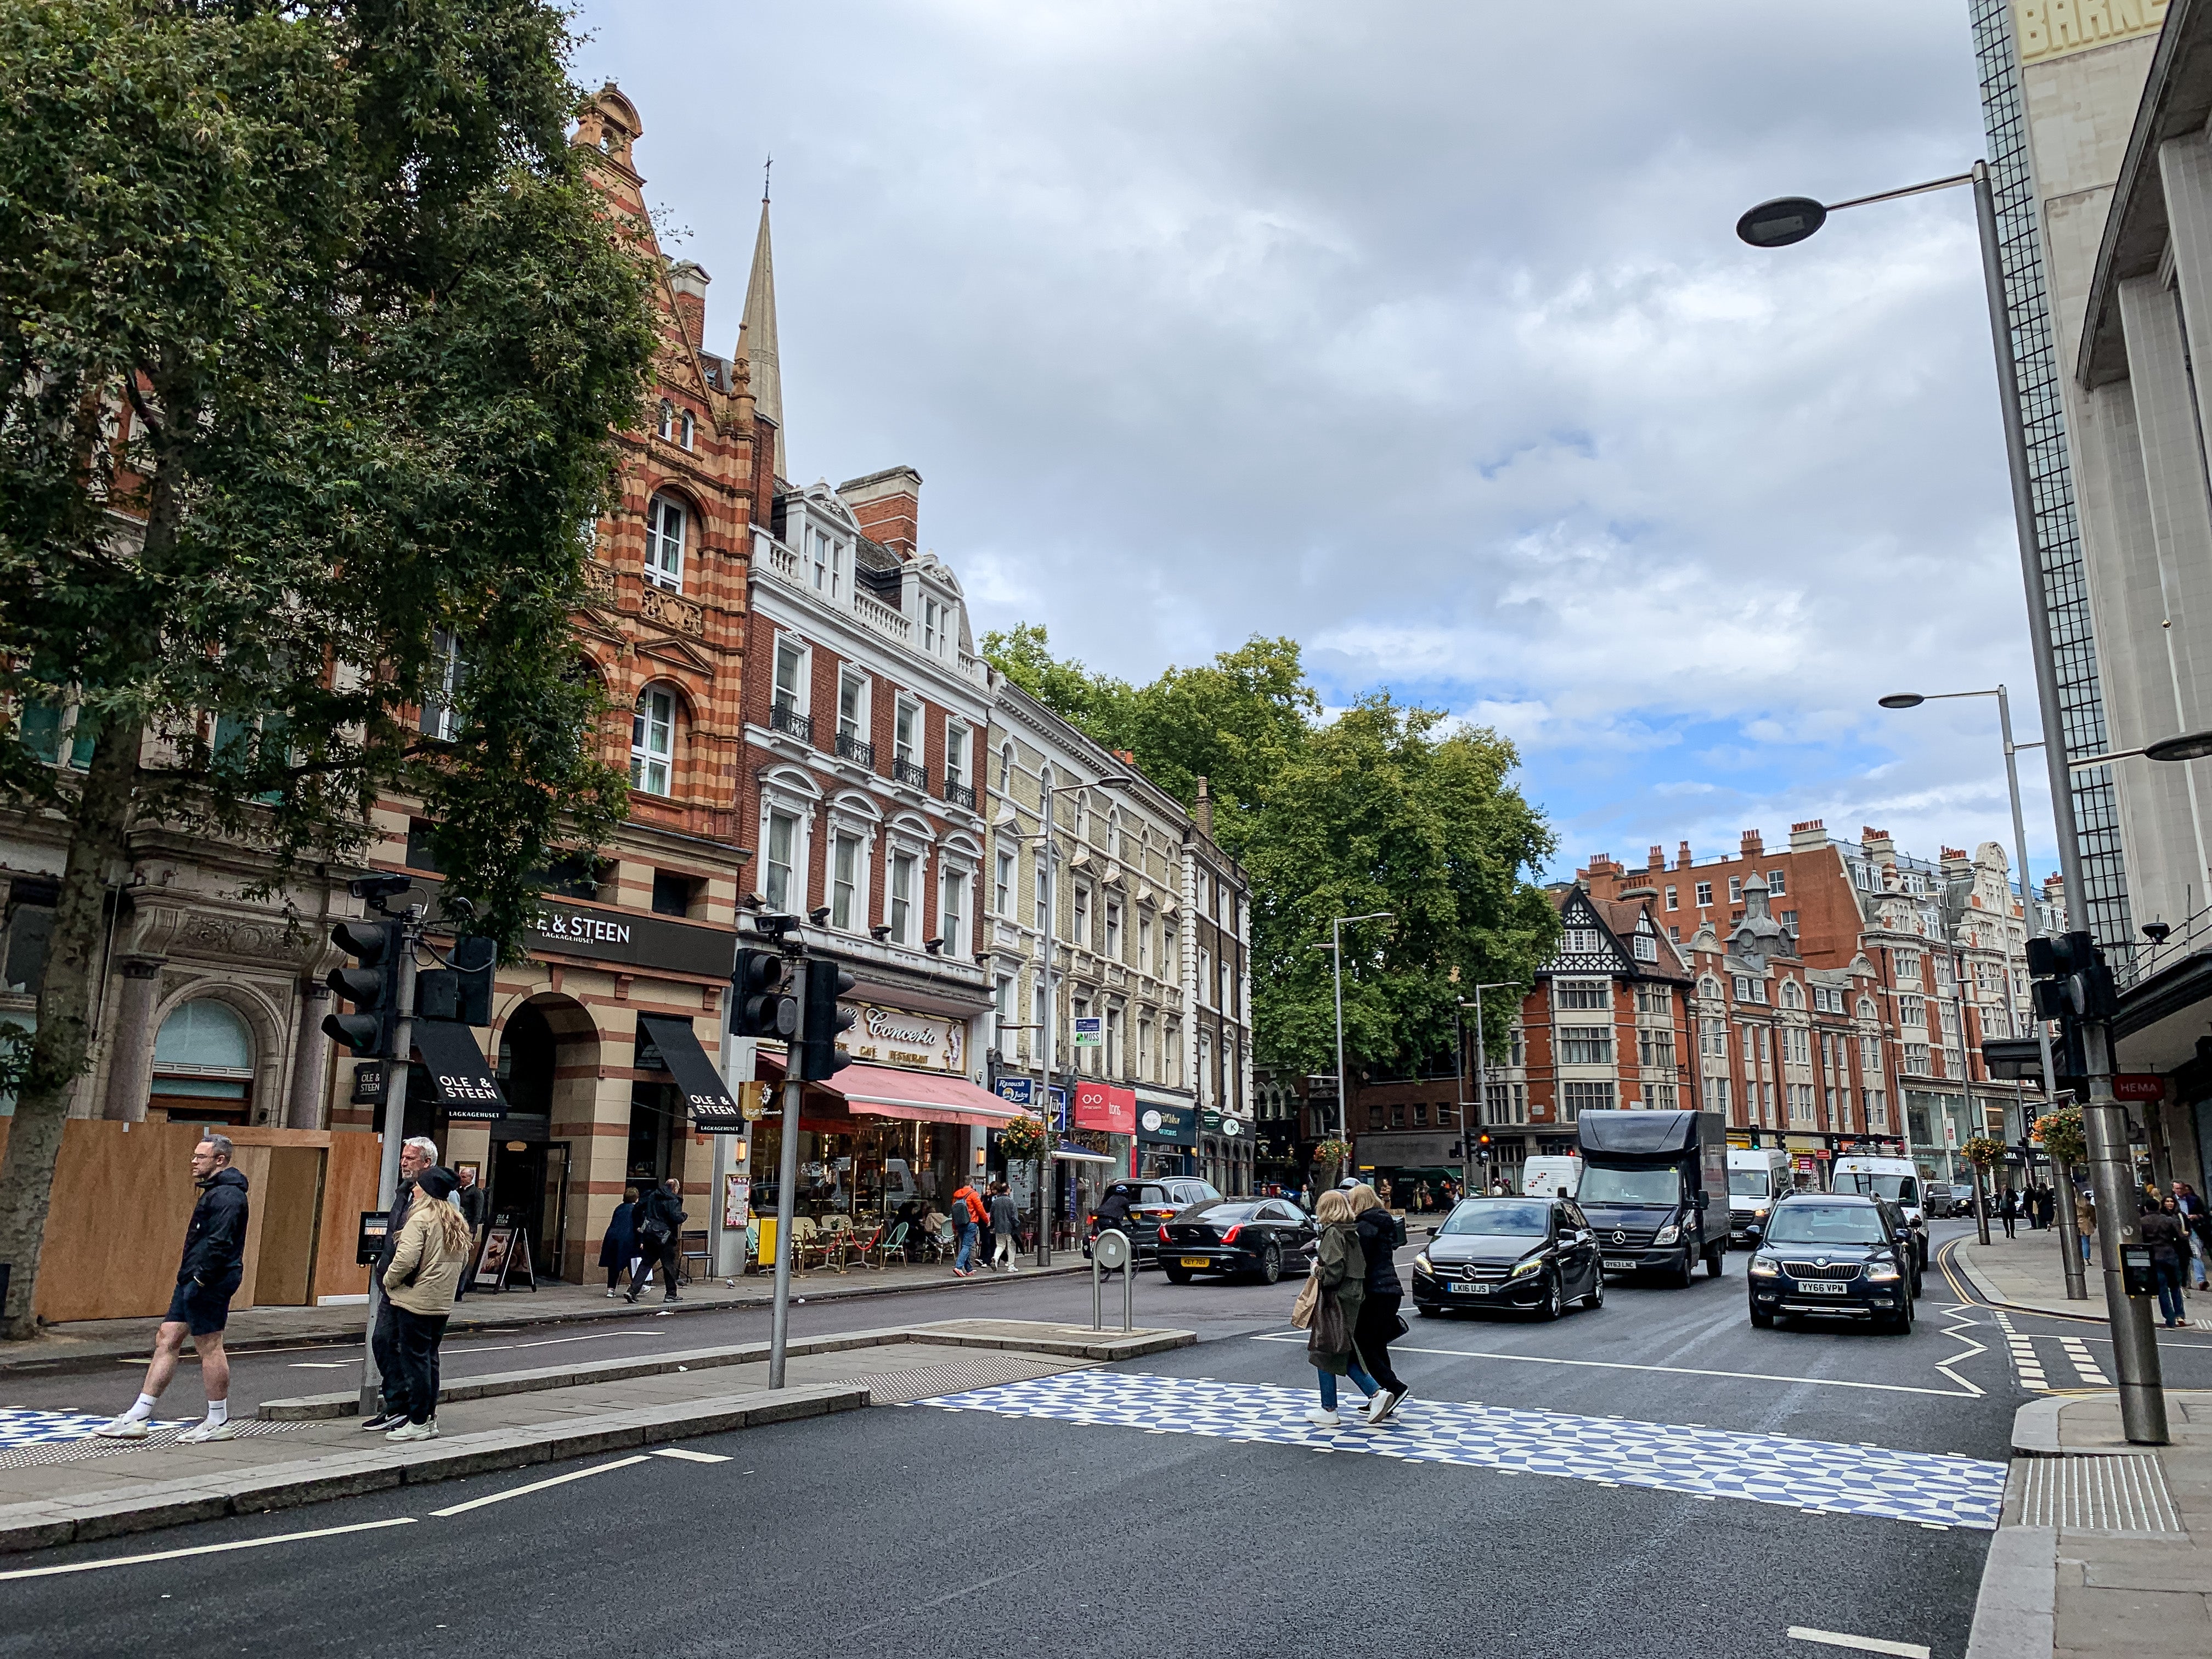 Kensington High Street boasts both high-end and high-street store fronts